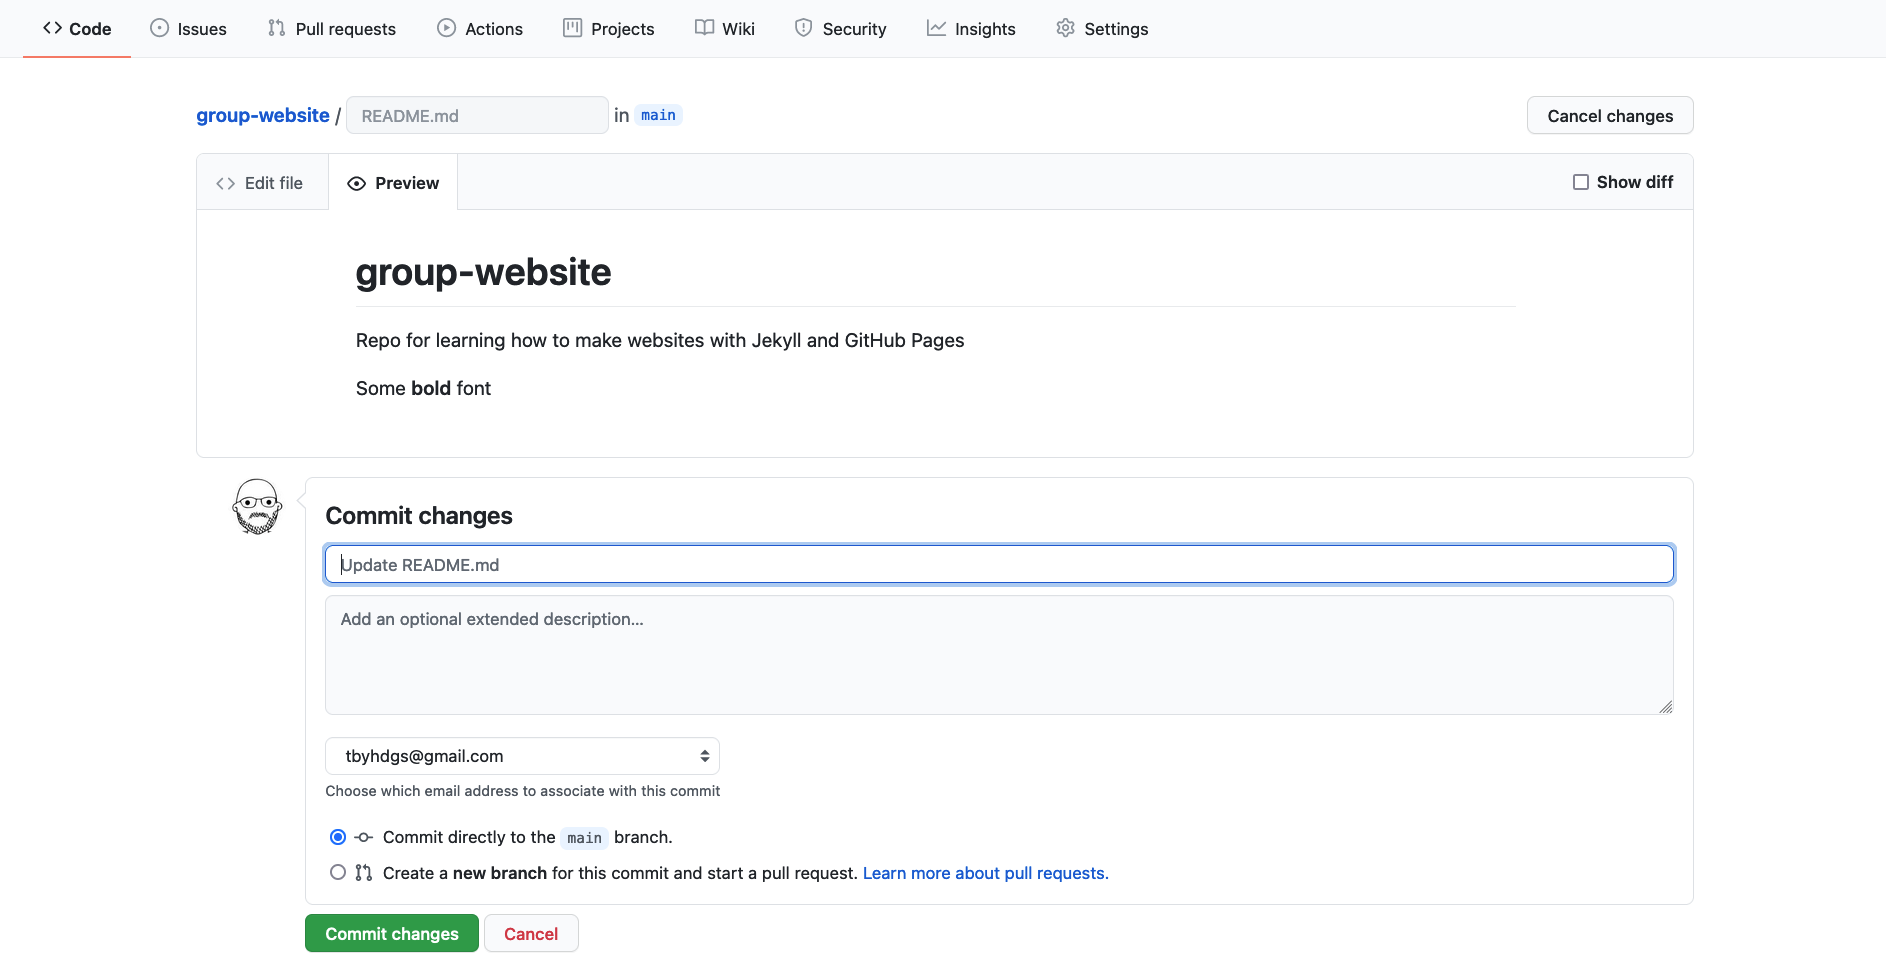 Commit menu for changes done in the GitHub web interface is located at the bottom of the website